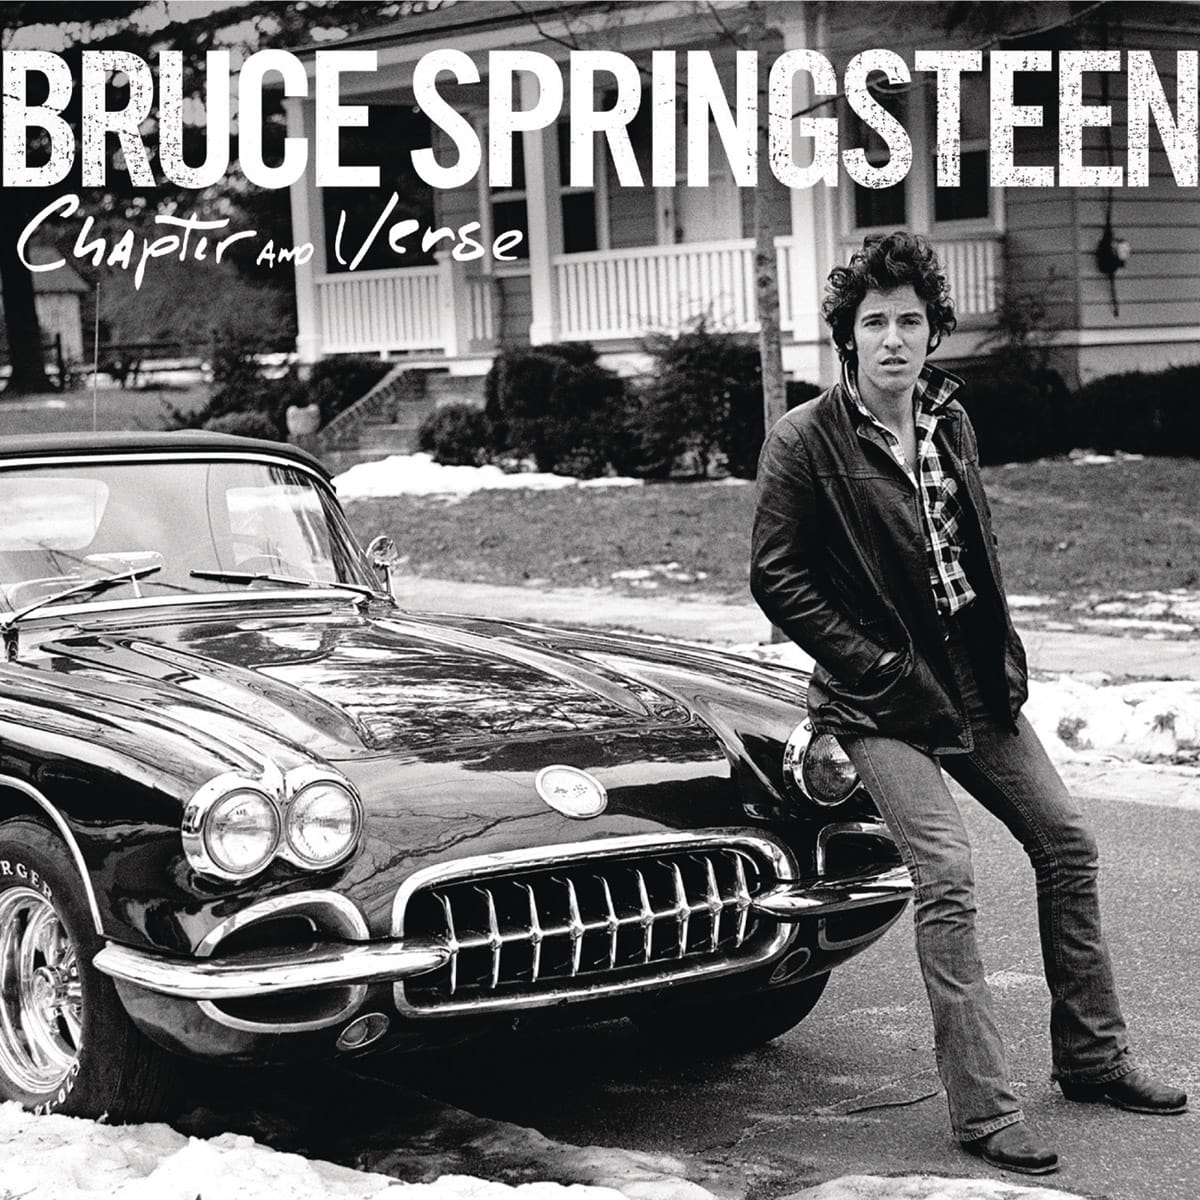 Bruce Springsteen Chapter and Verse front cover